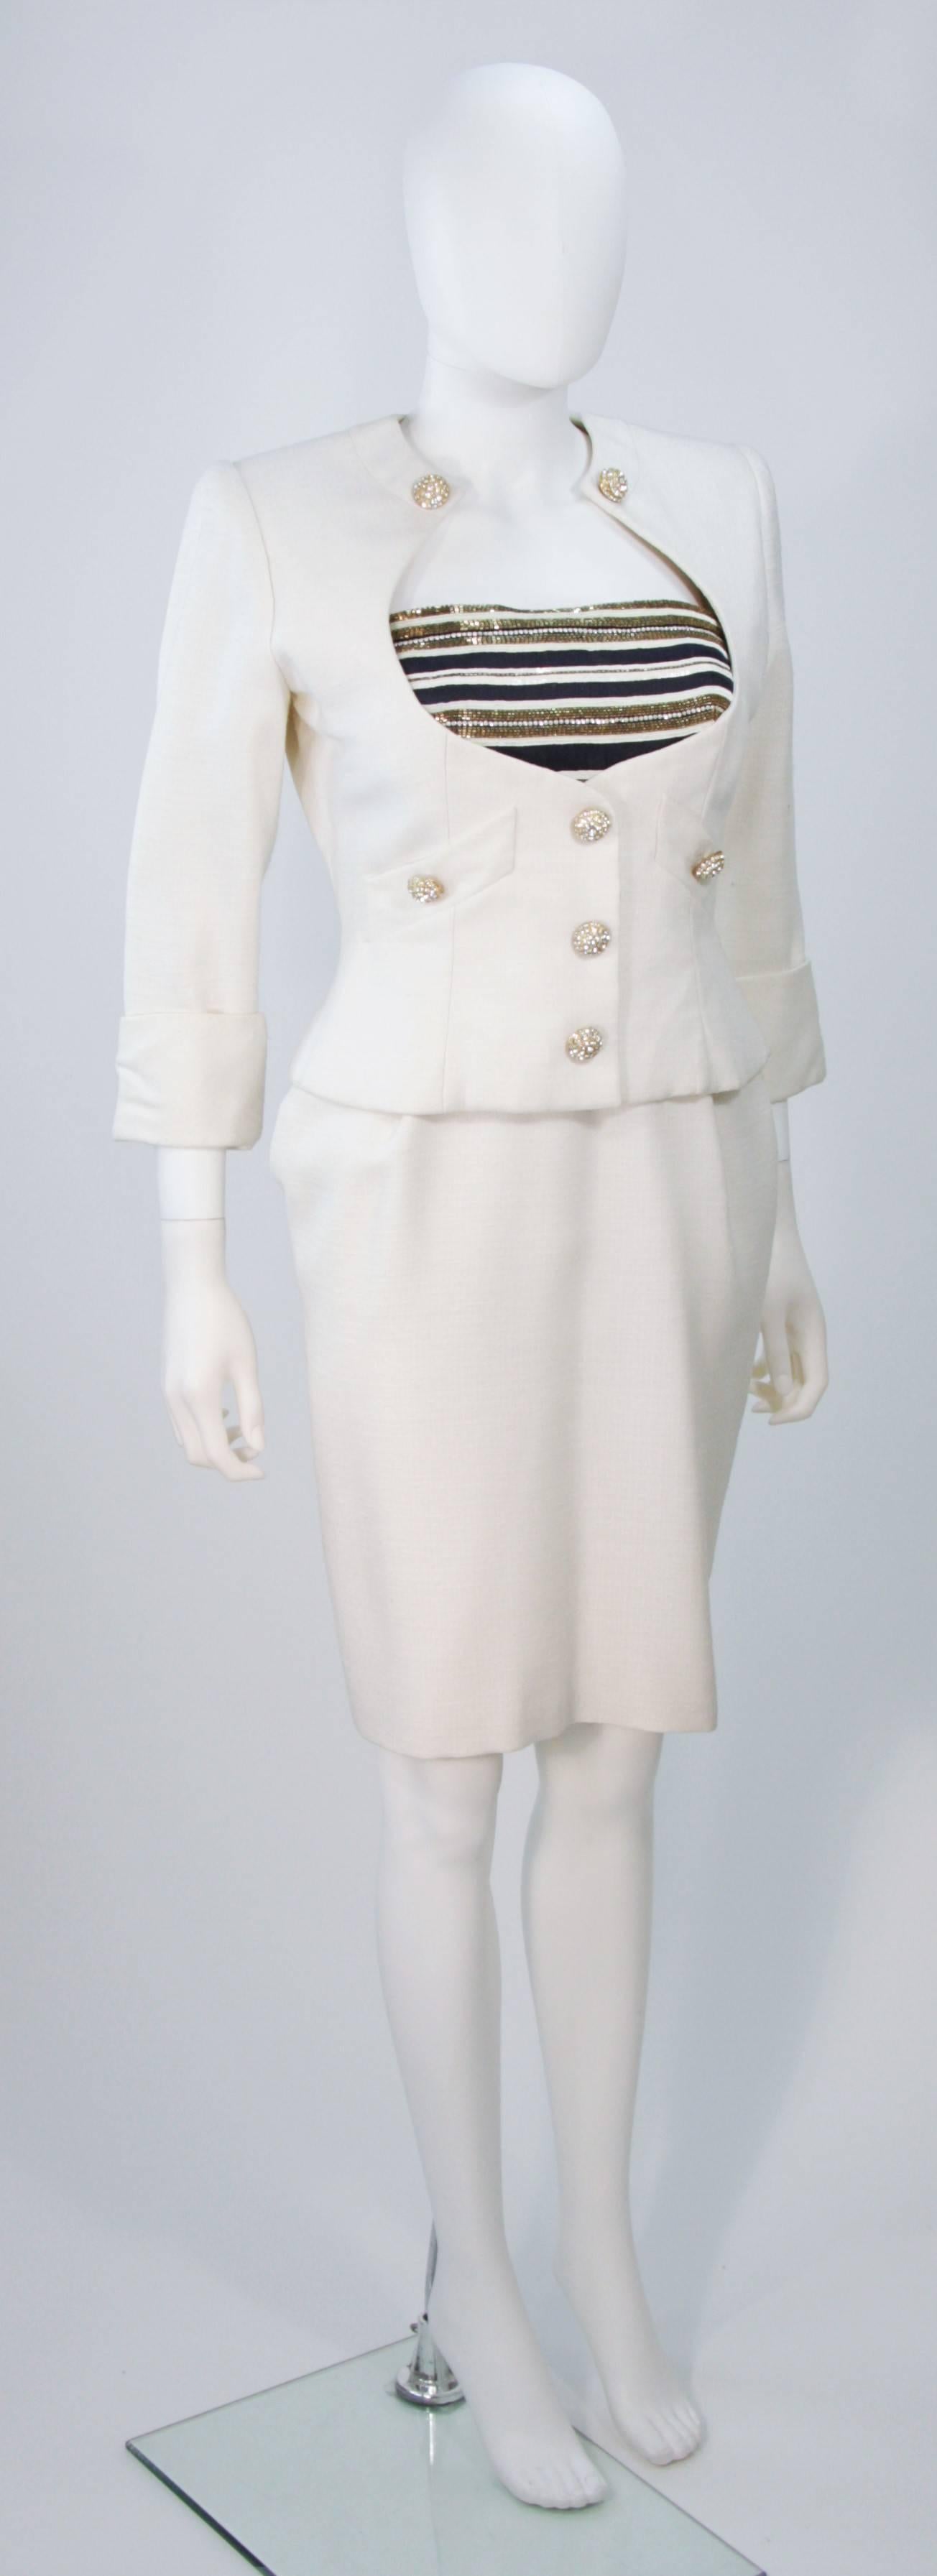 JEAN PATOU COUTURE Embellished White Gold & Navy Linen Dress Ensemble Size 2-4 In Excellent Condition For Sale In Los Angeles, CA